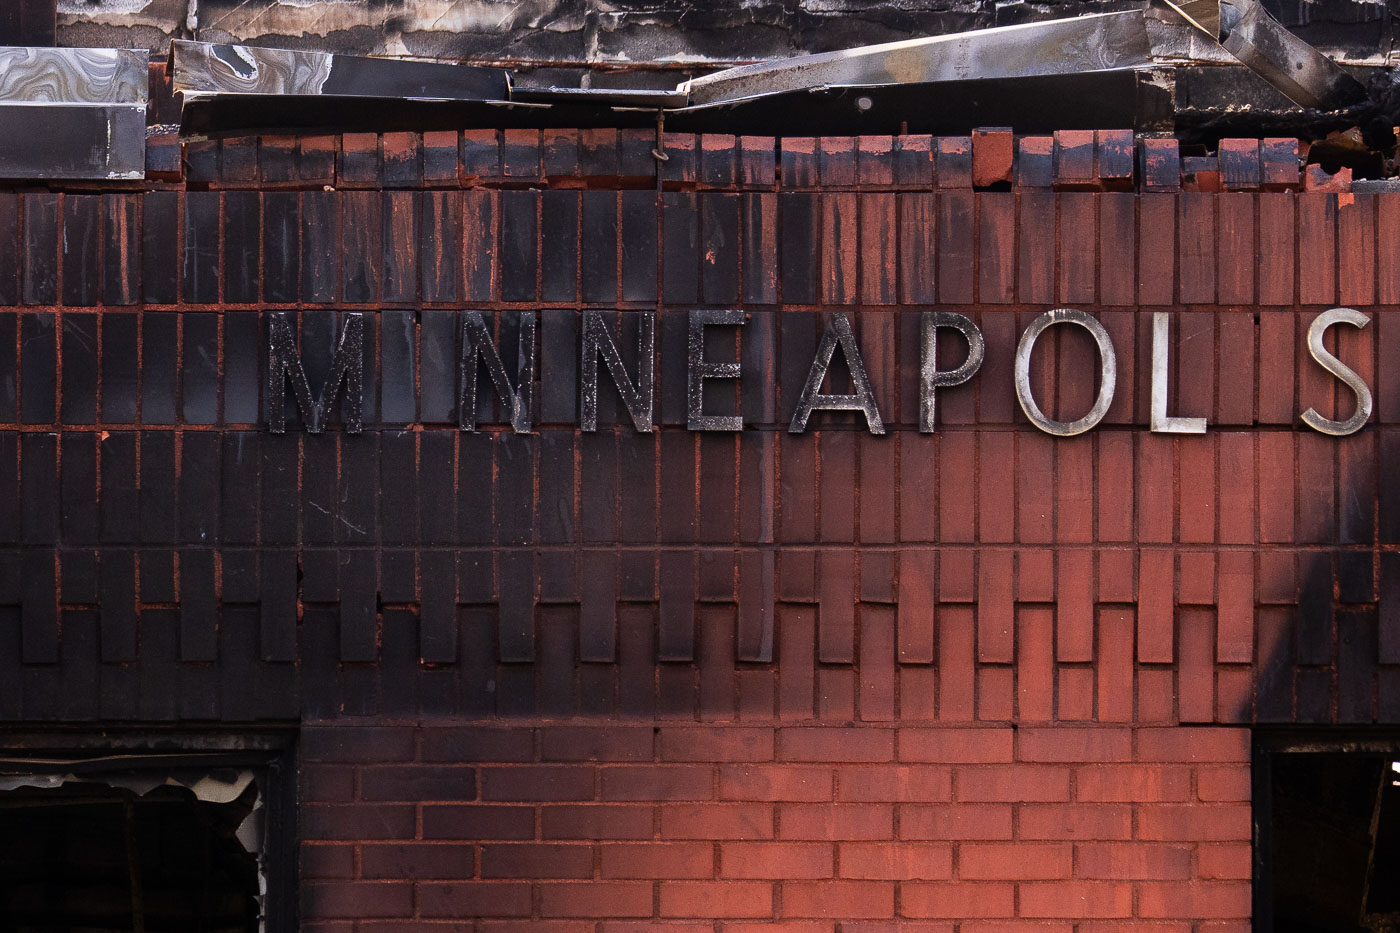 Burned letters on the side of a post office after a fire